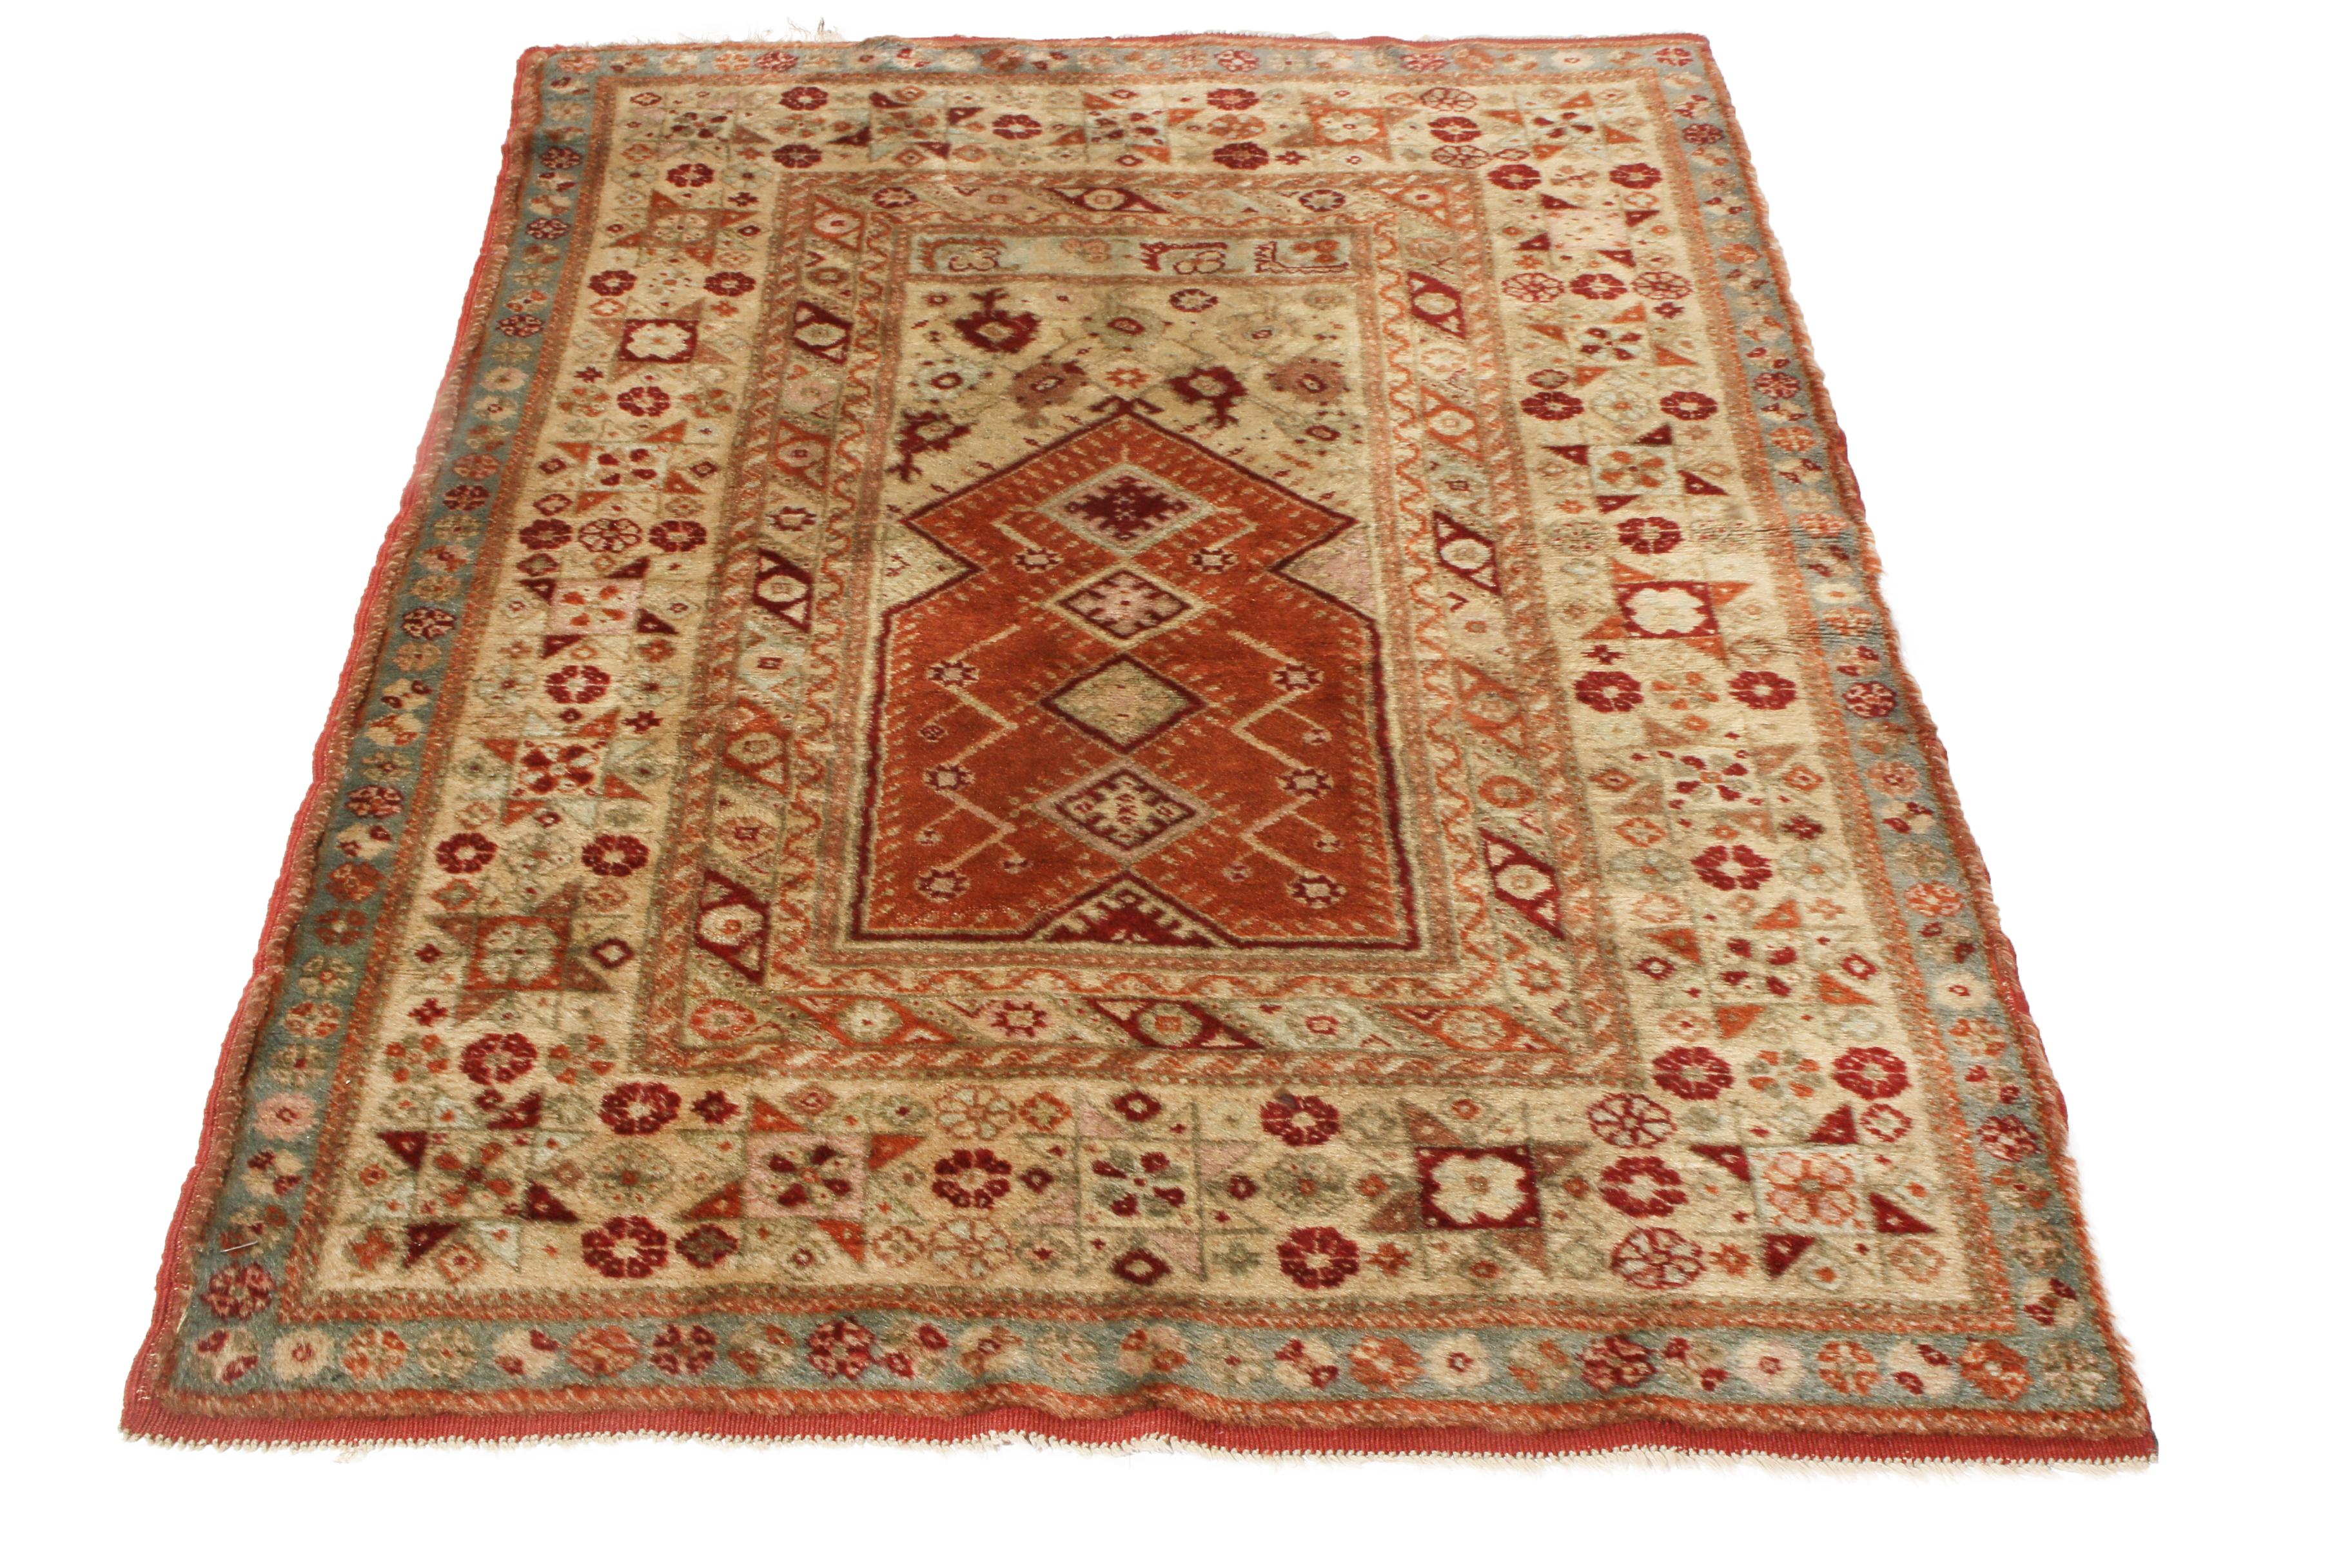 Originating from Europe in 1910, this antique traditional Oushak rug employs a seldom-seen abundance of various oriental symbols. Hand knotted in high-quality wool, the geometric field and border designs alike feature variations of the eight-pointed